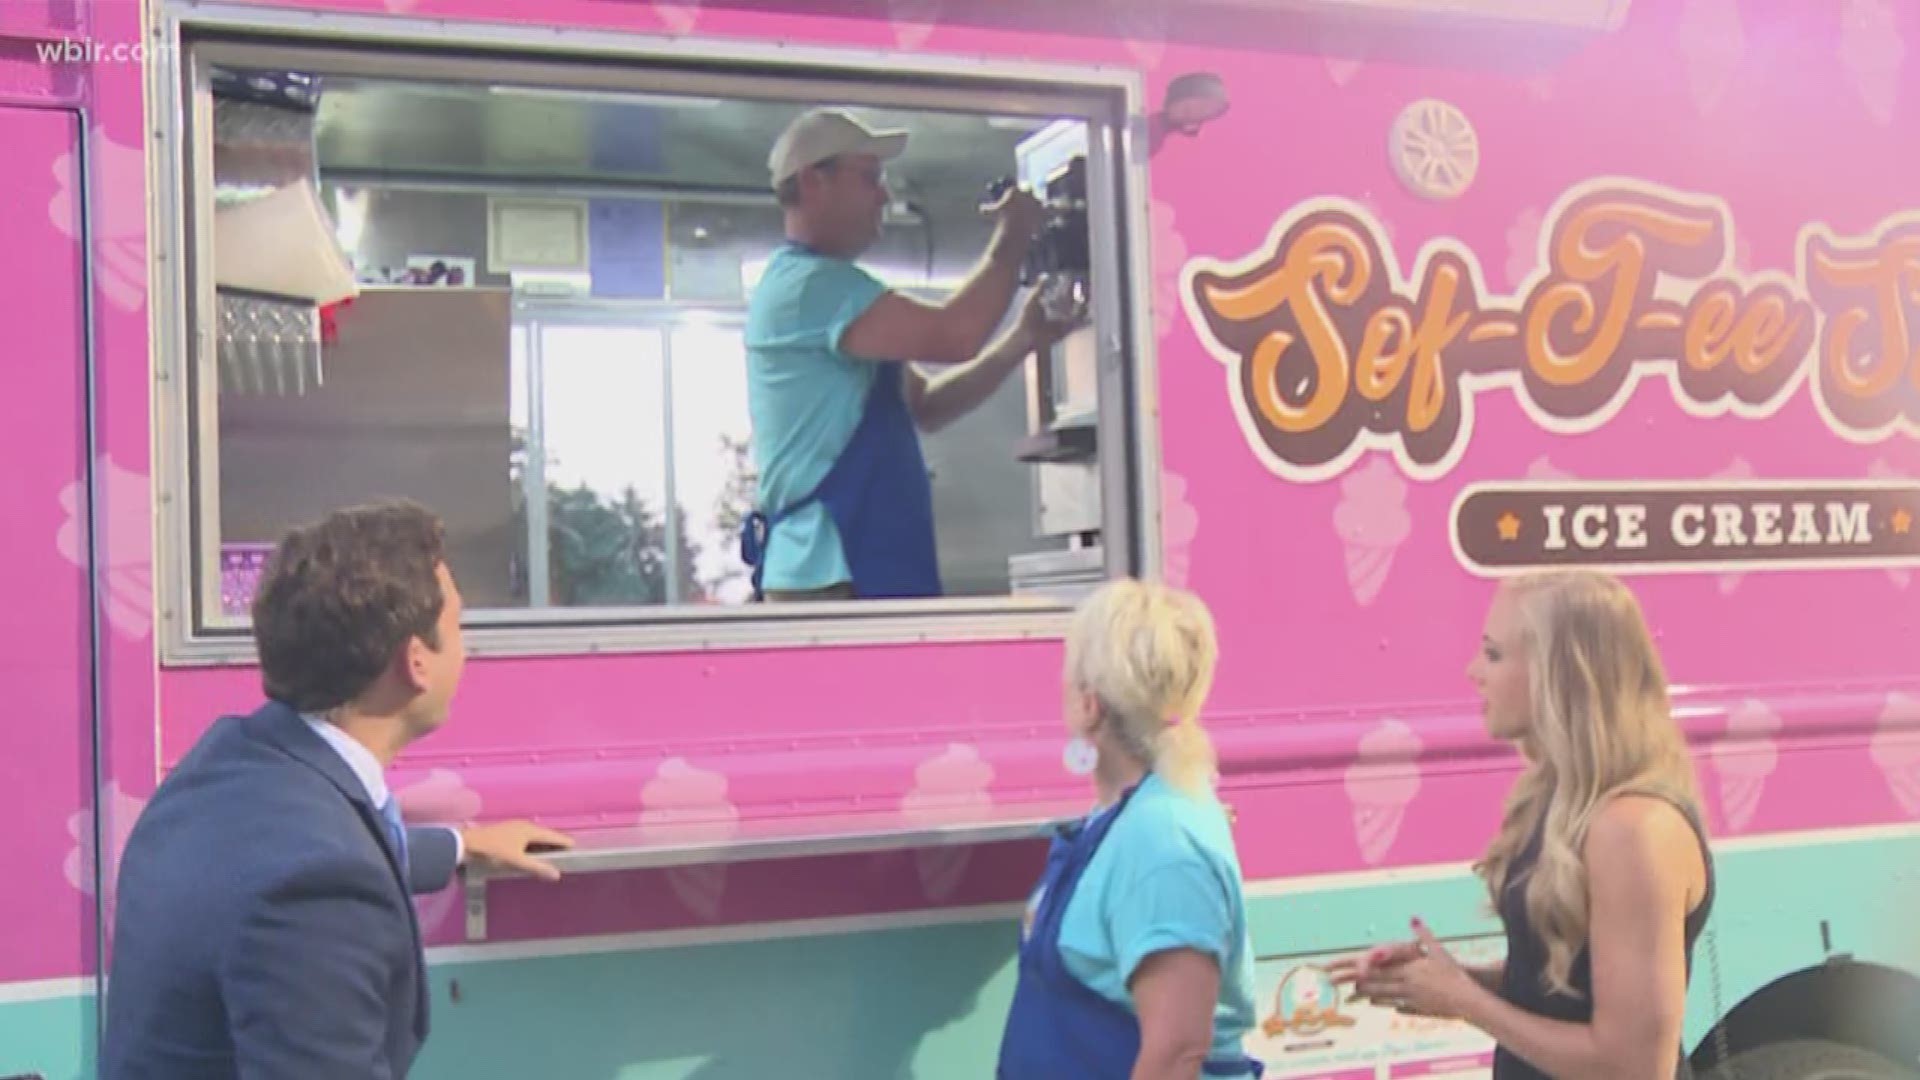 The ice cream truck serves up the sweet treat and a smile for National Ice Cream Day. It's run by a couple who lives in Knoxville.